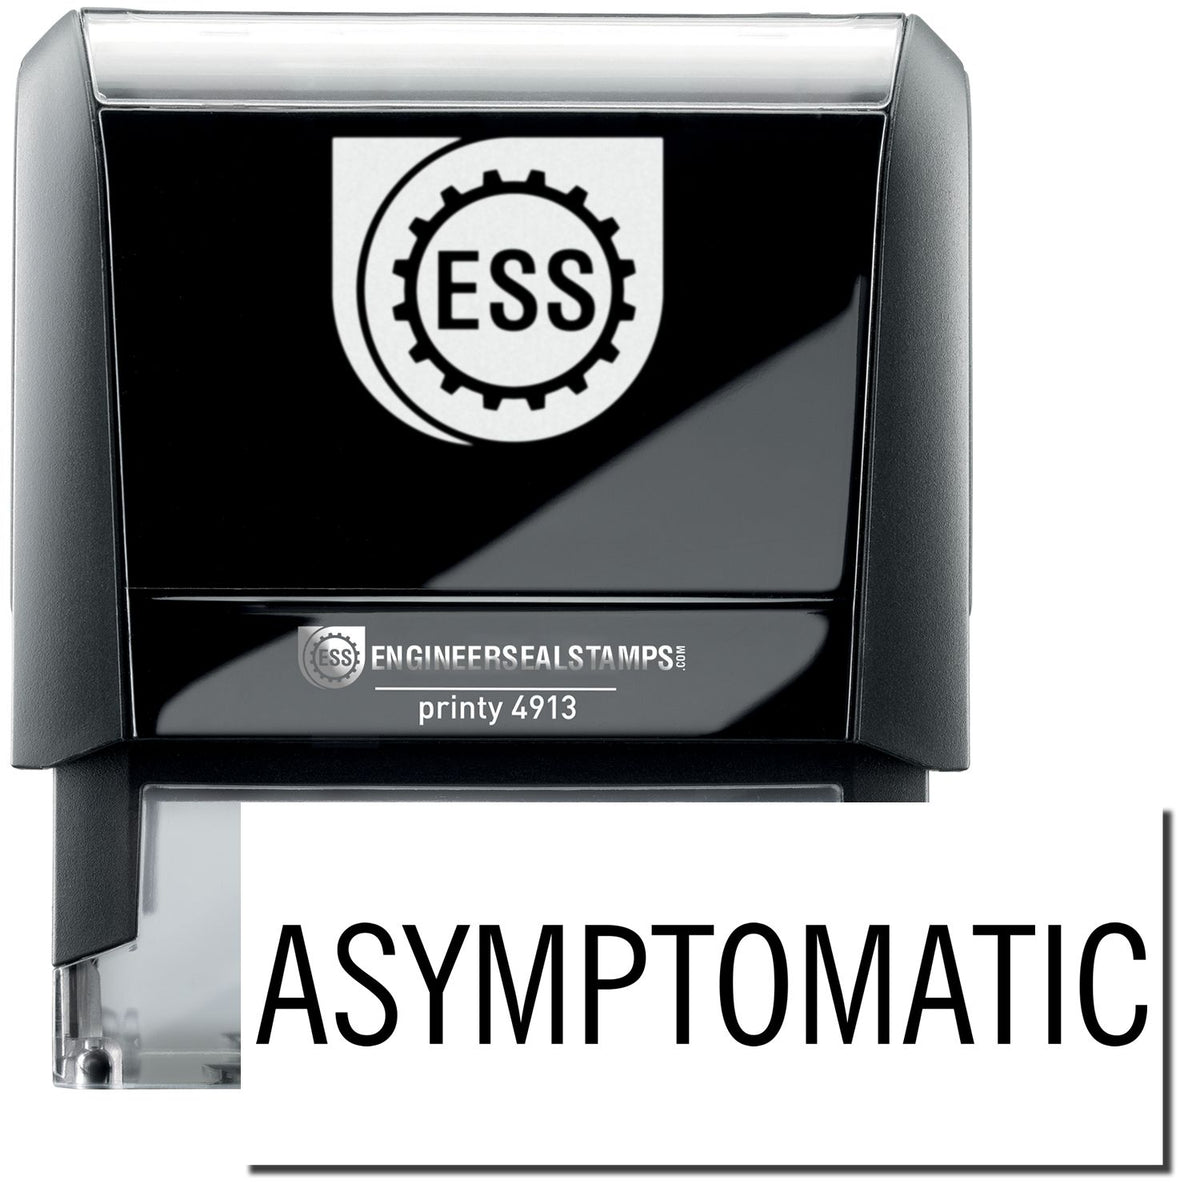 A self-inking stamp with a stamped image showing how the text &quot;ASYMPTOMATIC&quot; in a large font is displayed by it after stamping.